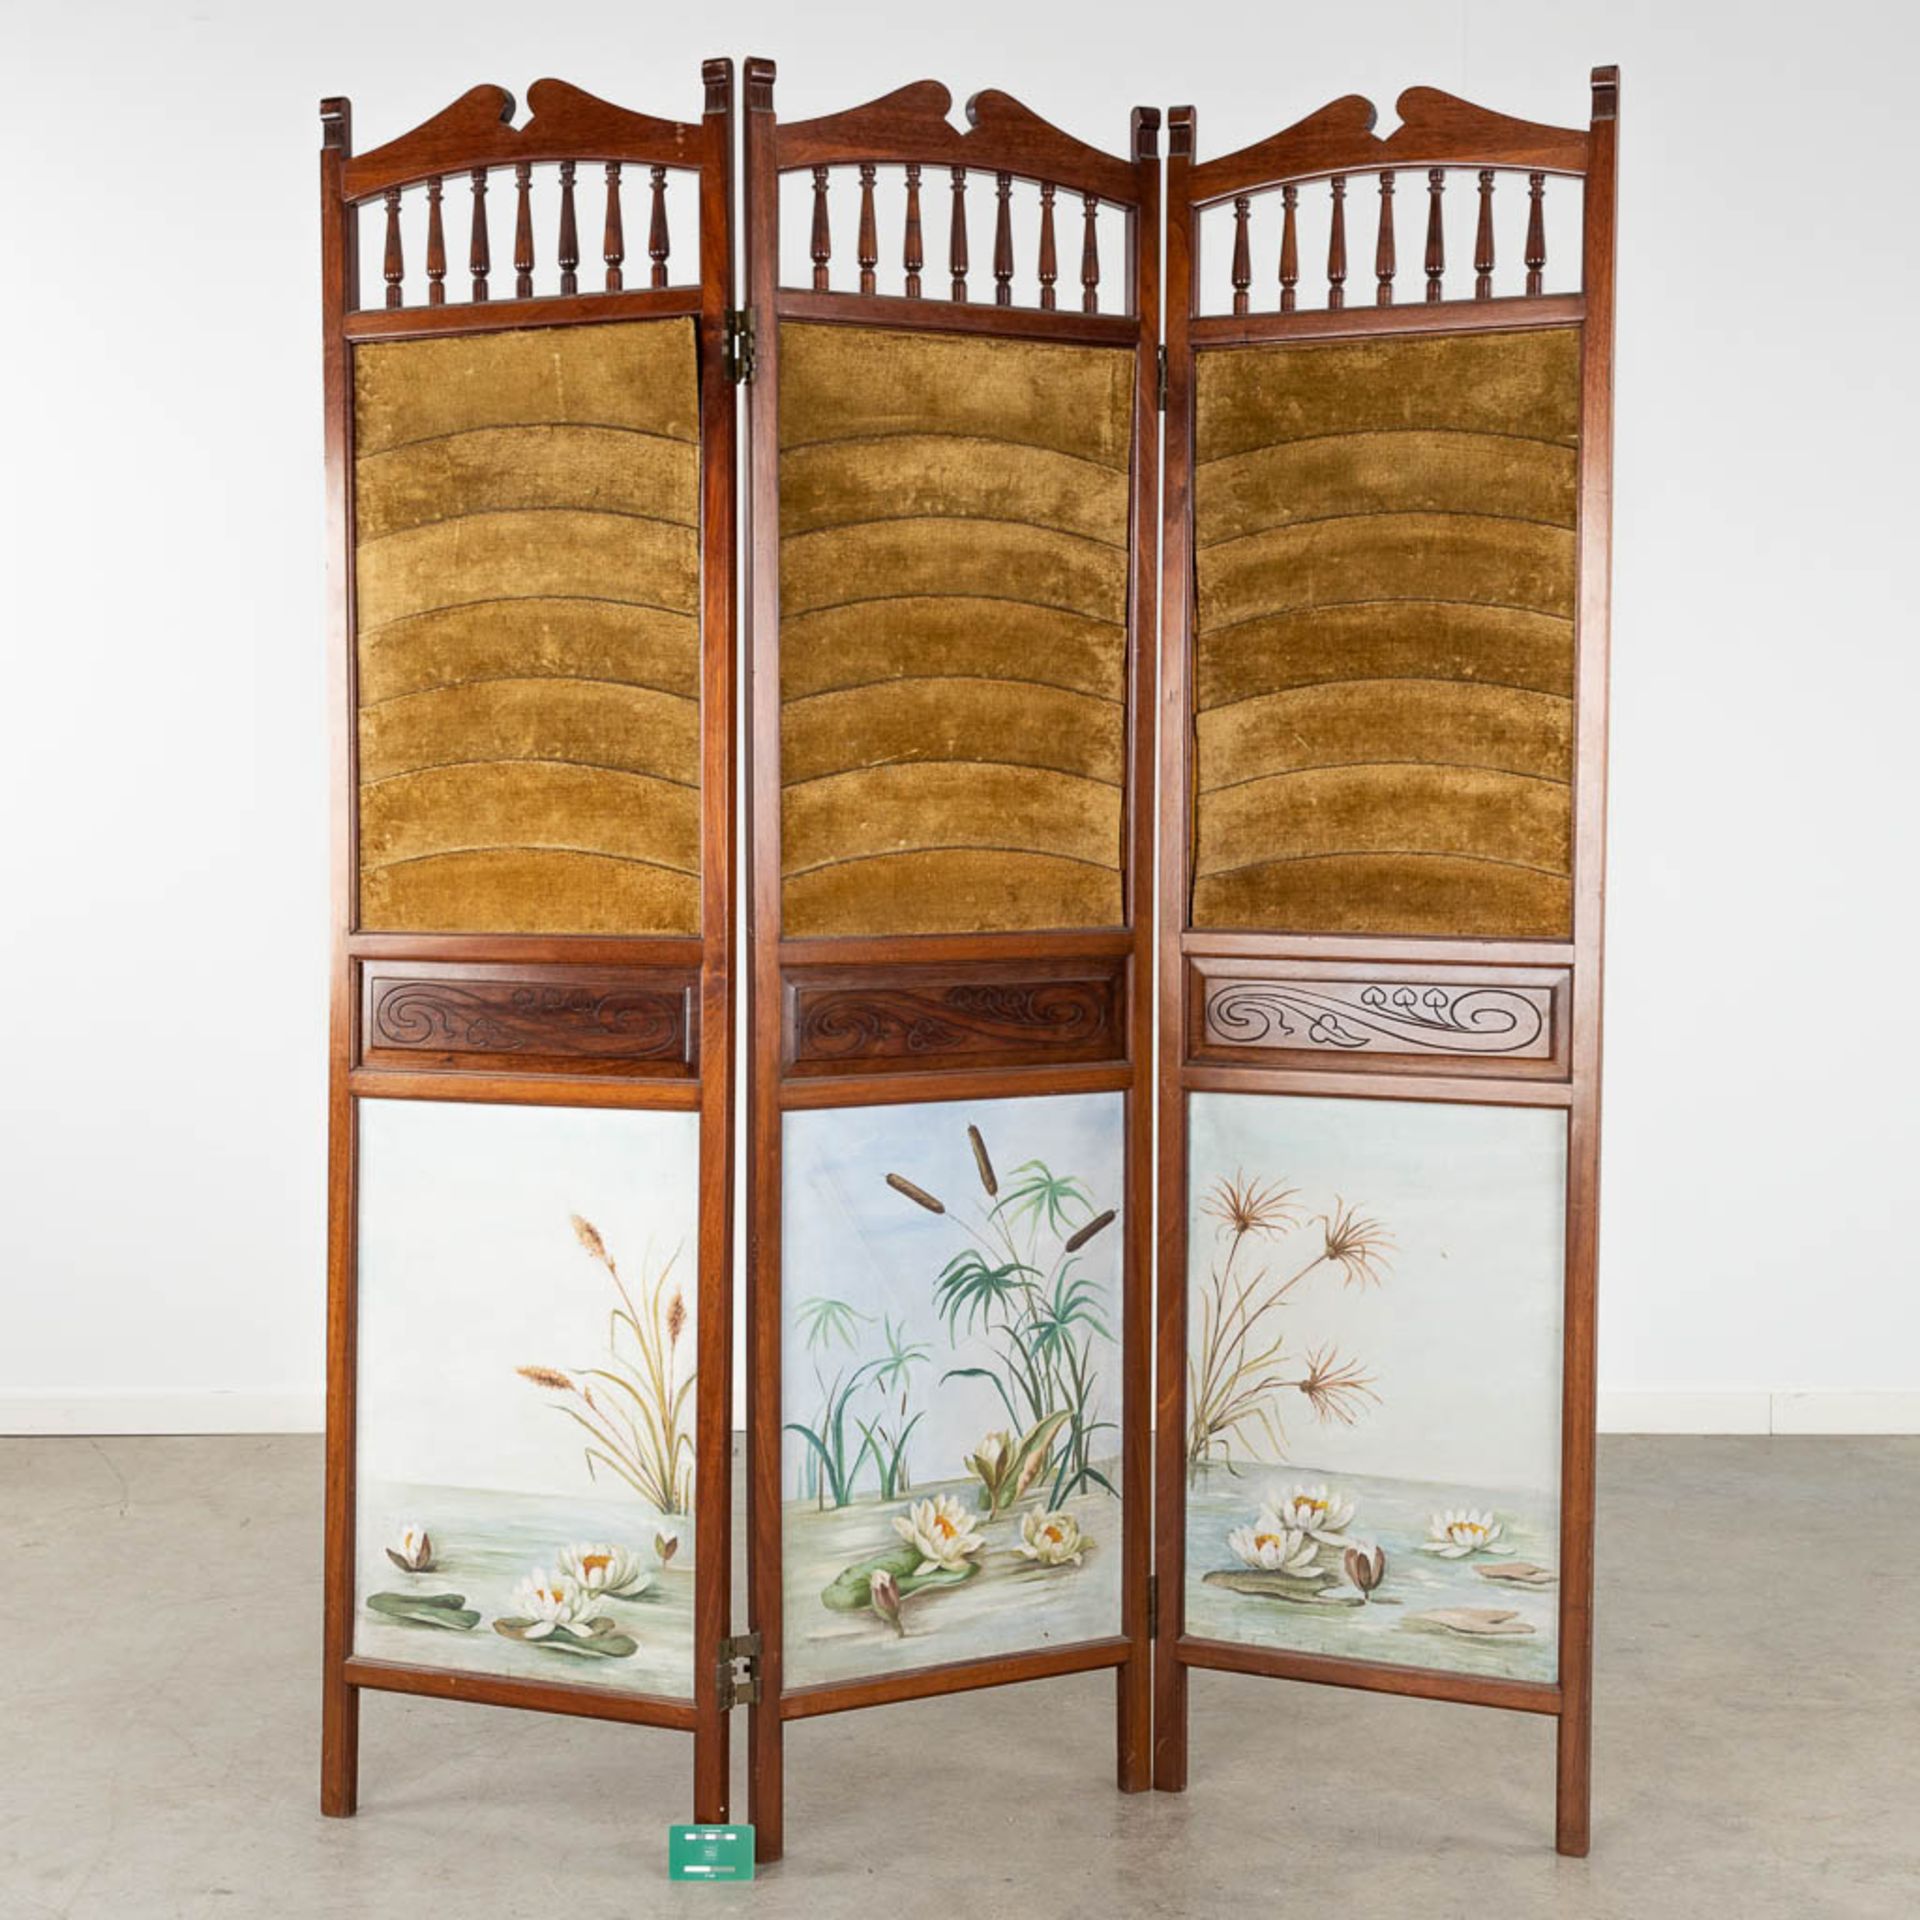 A room divider with painting and &quot;pêle mêle&quot; oil on canvas. (D:180 x W:143 cm) - Image 2 of 10